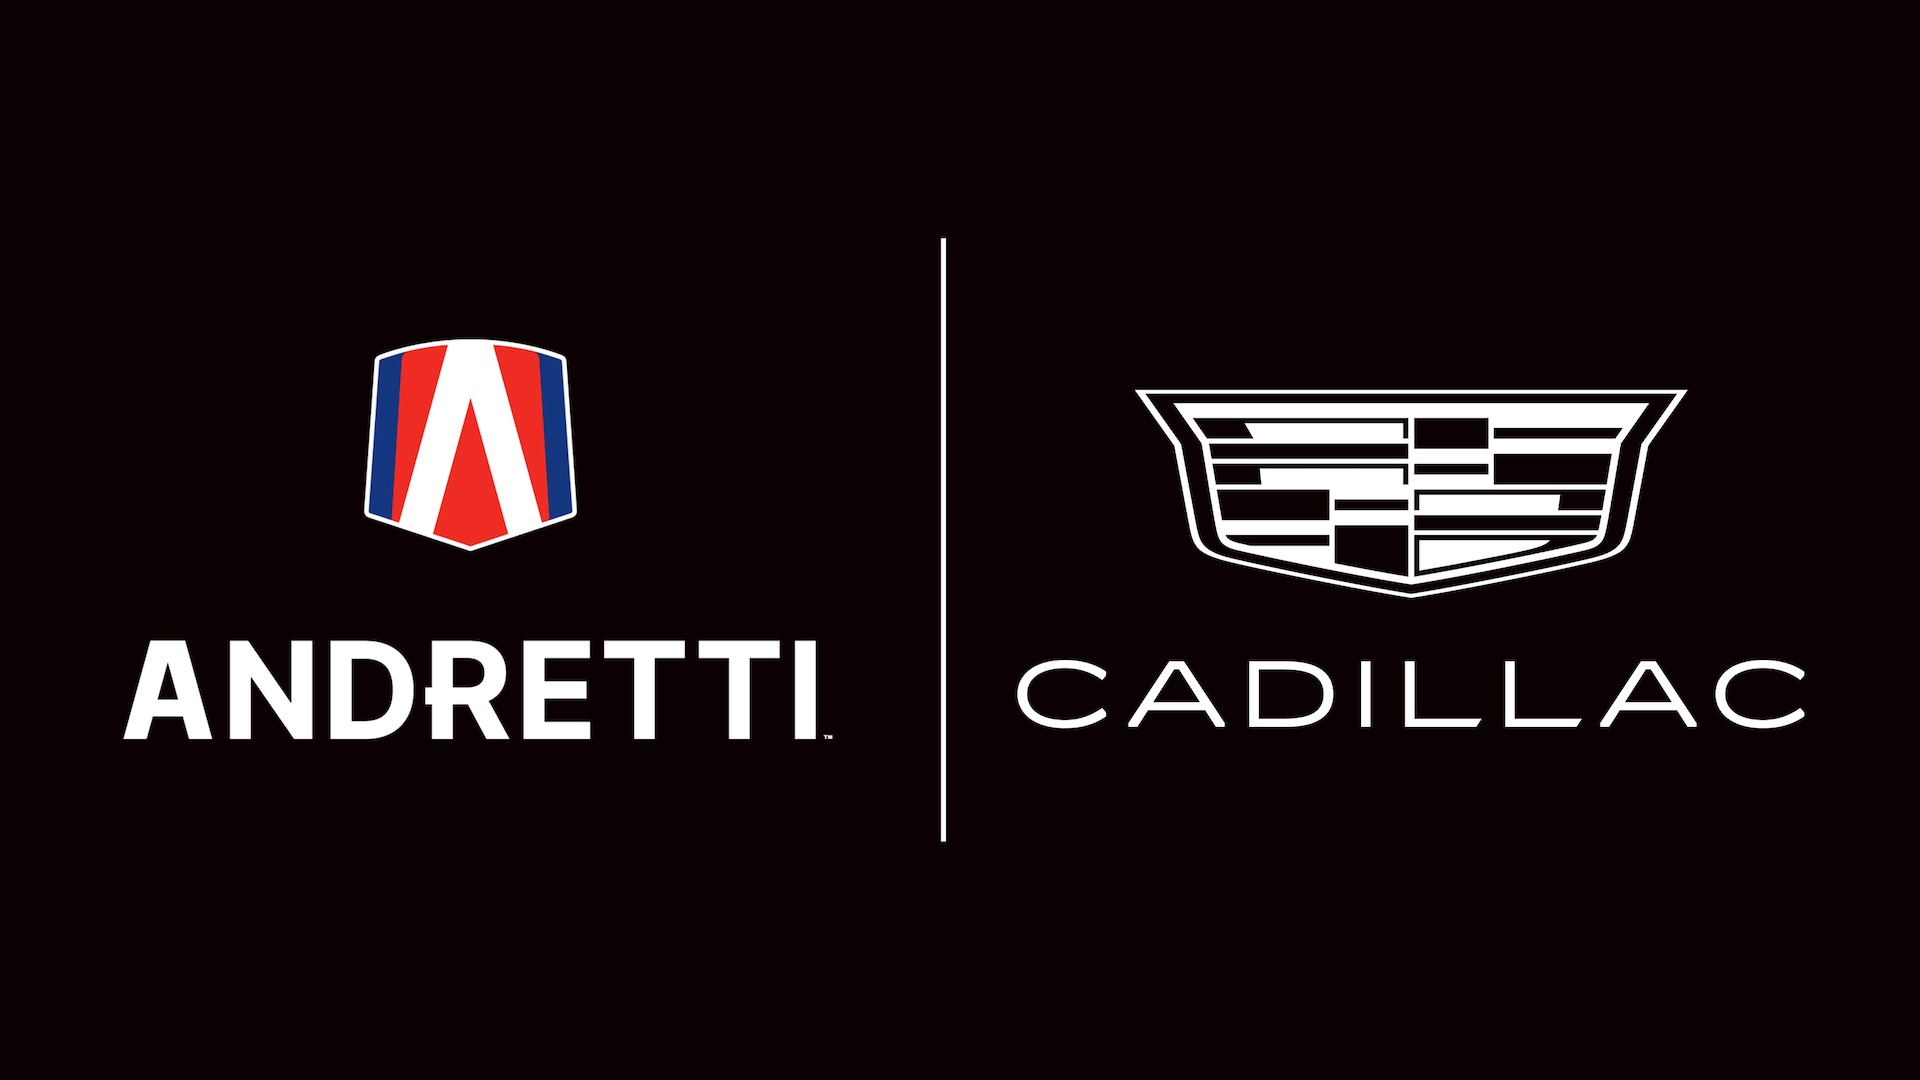 1672946146 Cadillac wants to enter F1 with Andretti